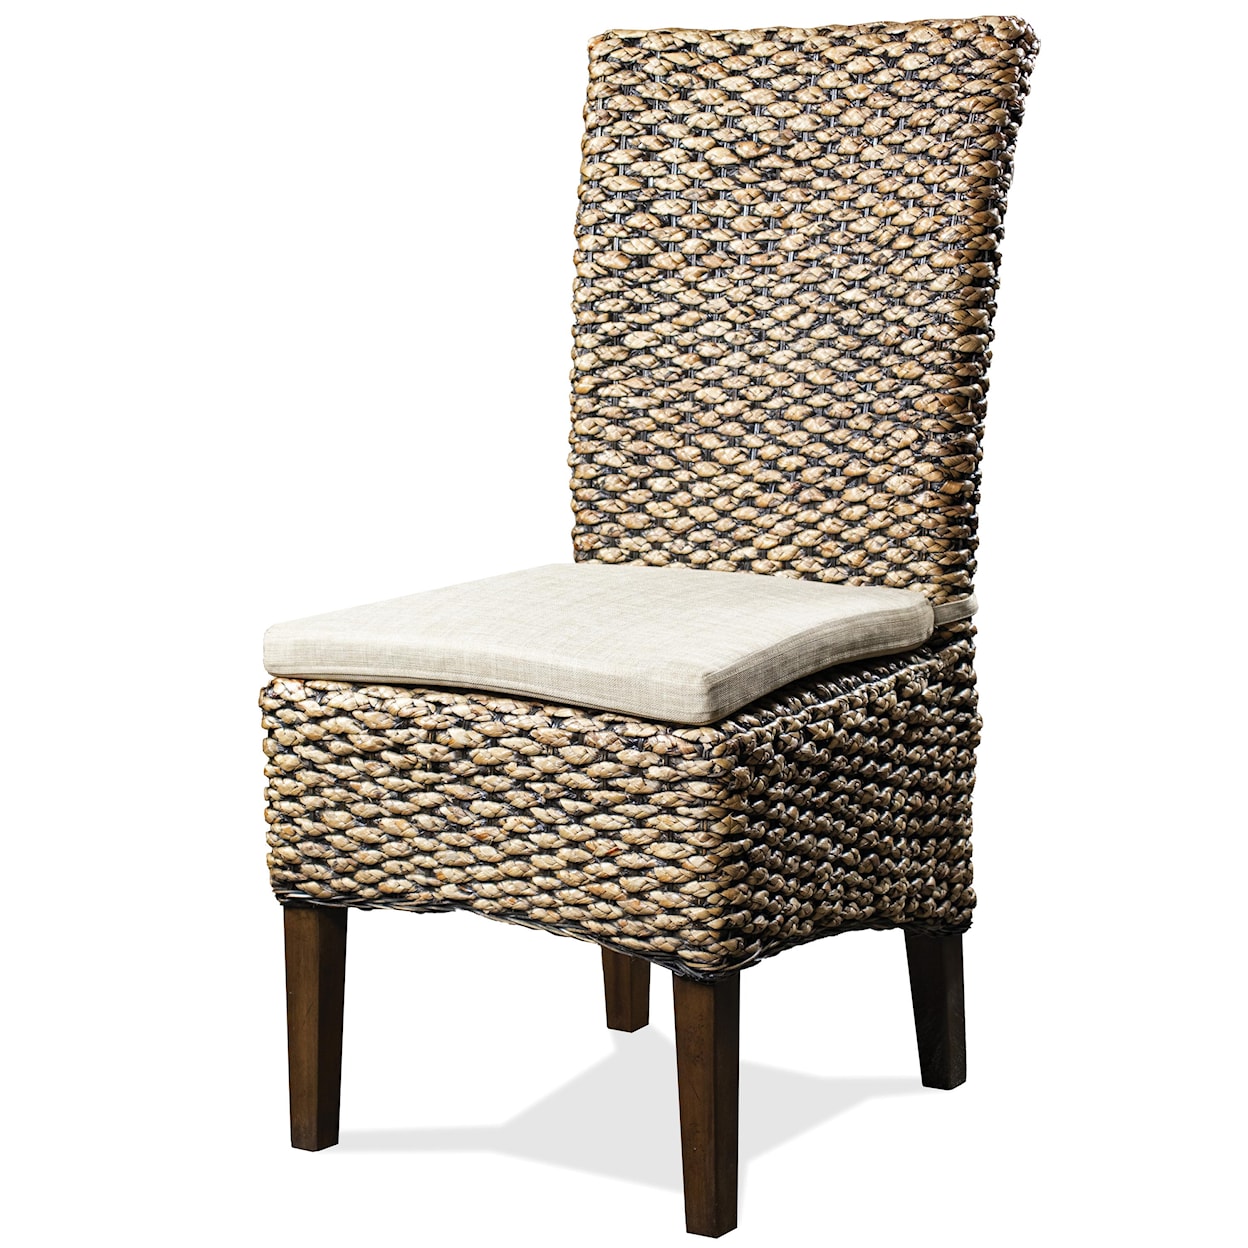 Riverside Furniture Mix-N-Match Chairs Woven Side Chair